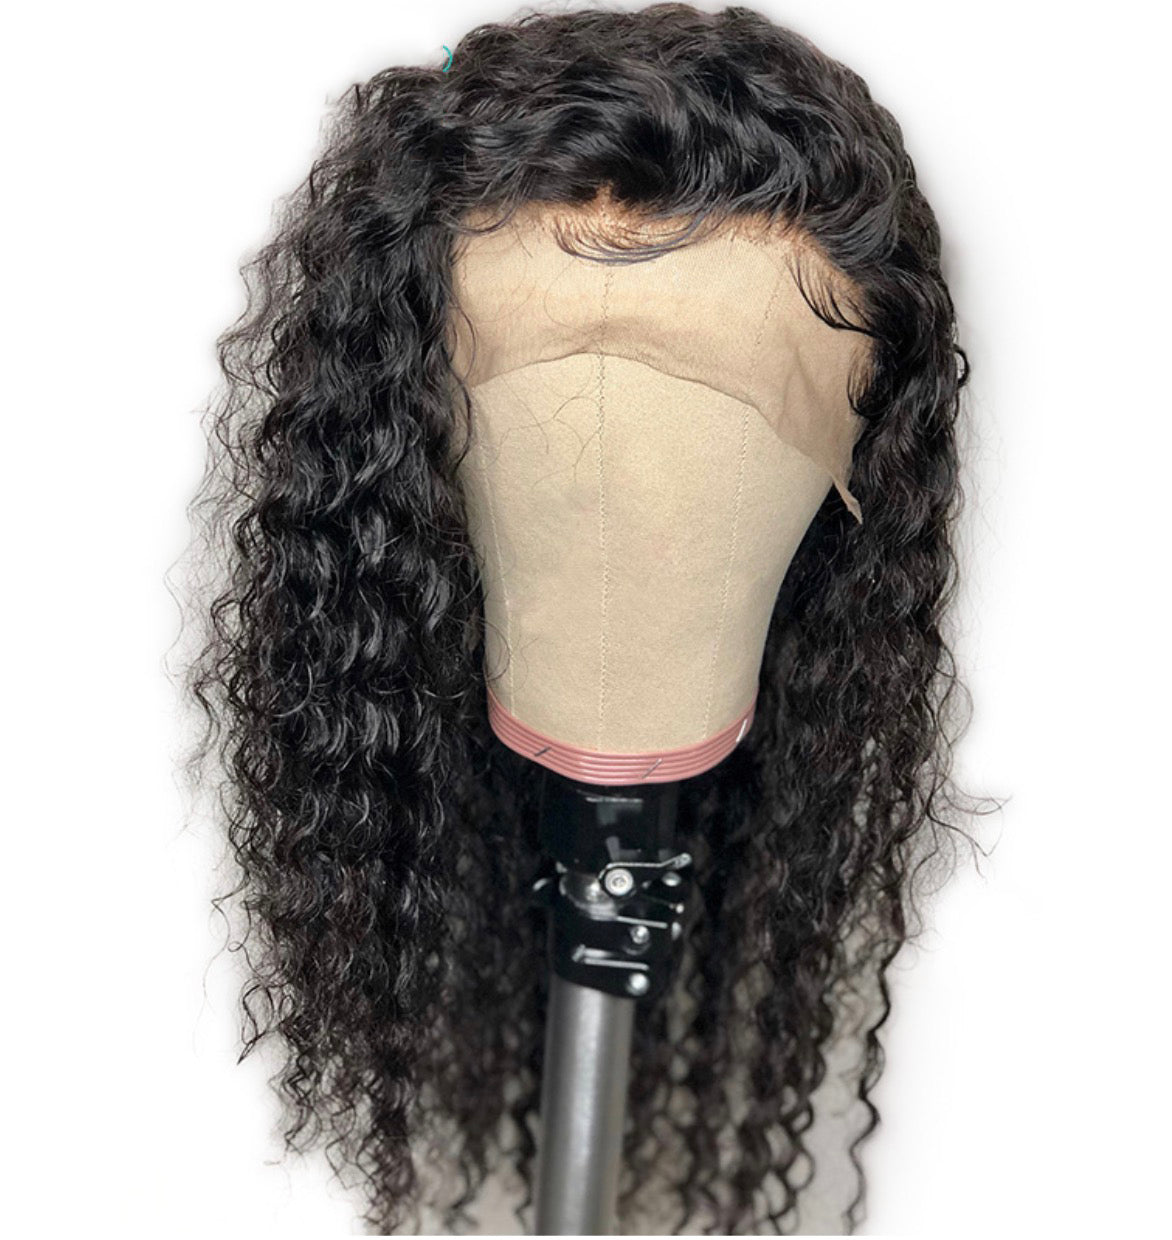 Lace Front Human Hair Wigs For Black Women Remy Peruvian Deep Curly Human Hair Lace Wig With Baby Hair Pre Plucked  Dialove Hair